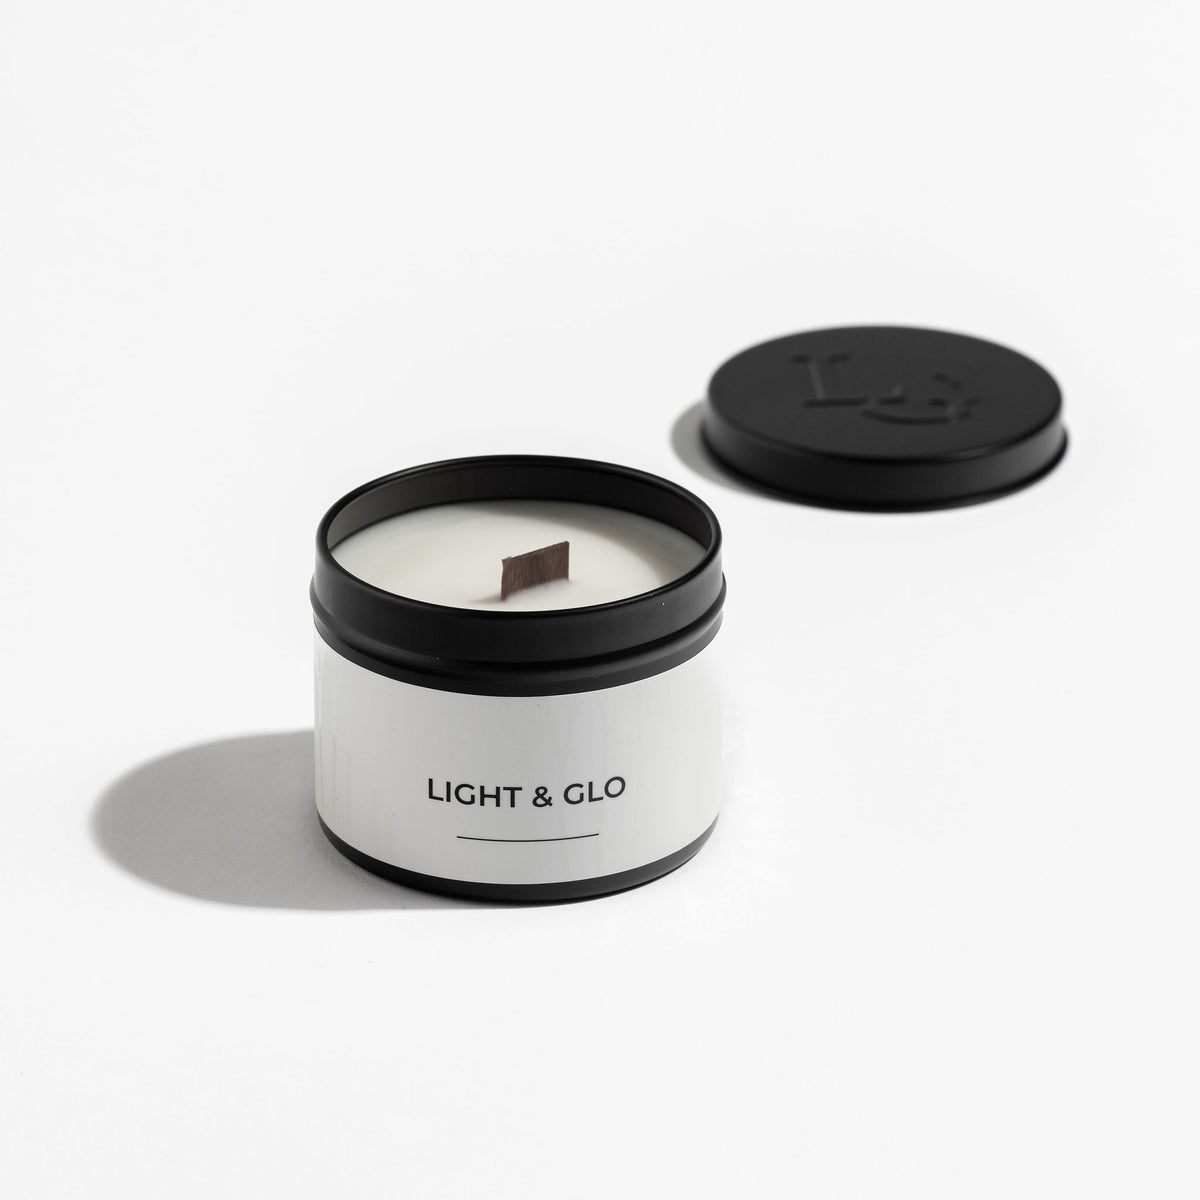 Vanilla Caramel - Monochrome Travel Candle | Luxury Candles &amp; Home Fragrances by Light + Glo